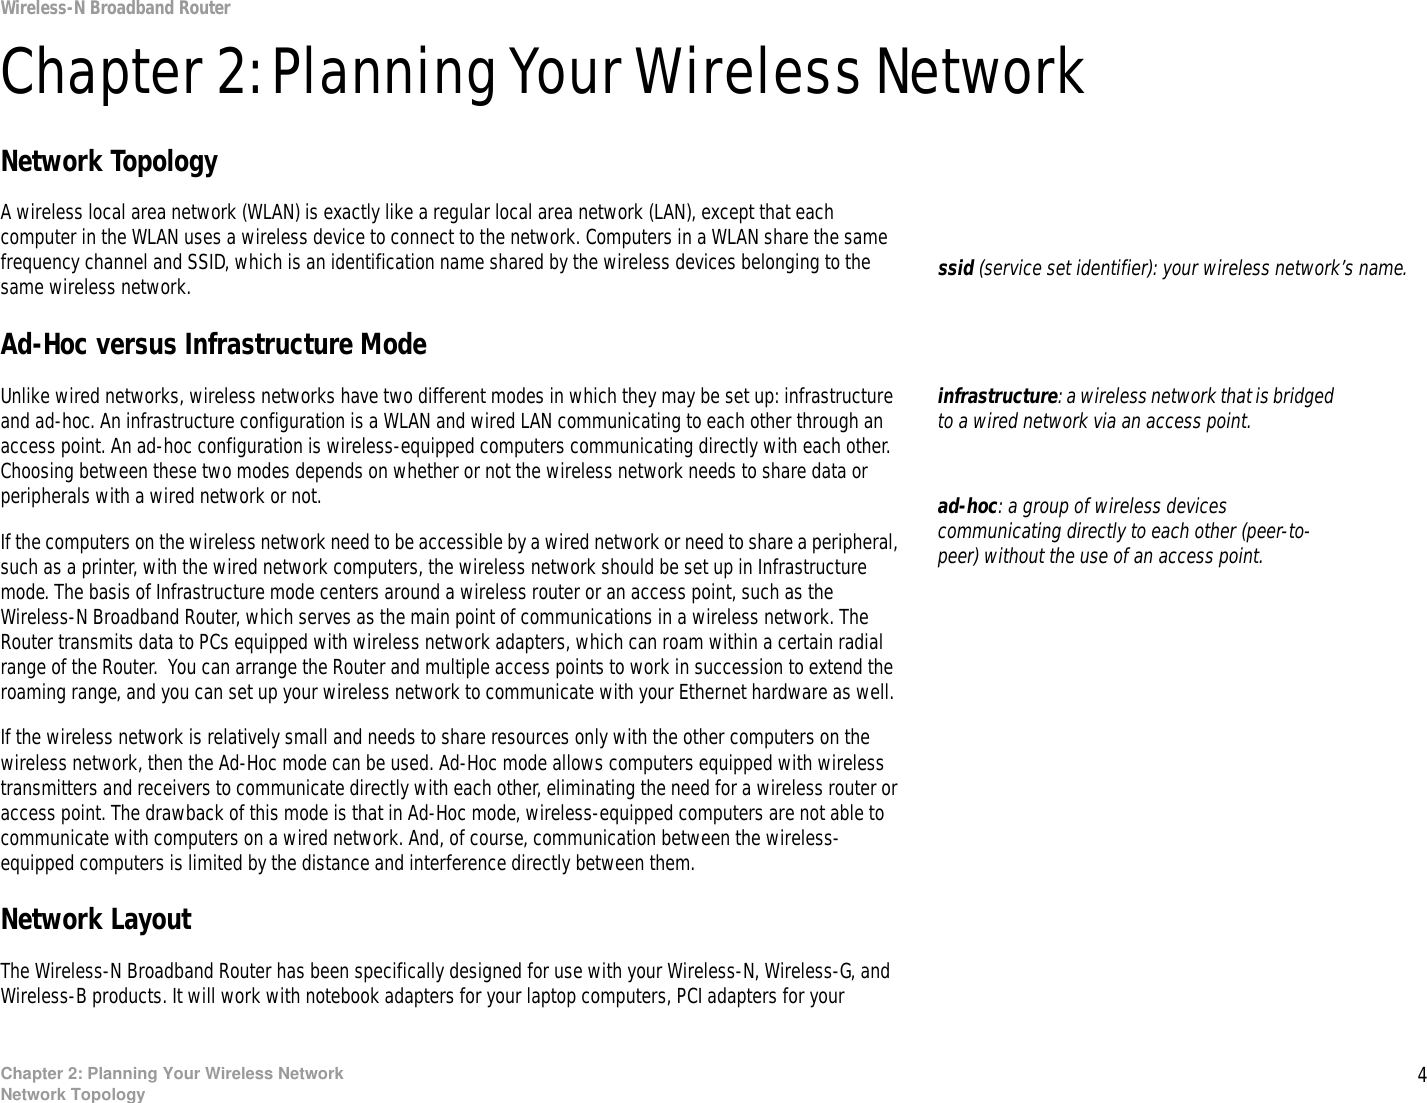 4Chapter 2: Planning Your Wireless NetworkNetwork TopologyWireless-N Broadband RouterChapter 2: Planning Your Wireless NetworkNetwork TopologyA wireless local area network (WLAN) is exactly like a regular local area network (LAN), except that each computer in the WLAN uses a wireless device to connect to the network. Computers in a WLAN share the same frequency channel and SSID, which is an identification name shared by the wireless devices belonging to the same wireless network.Ad-Hoc versus Infrastructure ModeUnlike wired networks, wireless networks have two different modes in which they may be set up: infrastructure and ad-hoc. An infrastructure configuration is a WLAN and wired LAN communicating to each other through an access point. An ad-hoc configuration is wireless-equipped computers communicating directly with each other. Choosing between these two modes depends on whether or not the wireless network needs to share data or peripherals with a wired network or not. If the computers on the wireless network need to be accessible by a wired network or need to share a peripheral, such as a printer, with the wired network computers, the wireless network should be set up in Infrastructure mode. The basis of Infrastructure mode centers around a wireless router or an access point, such as the Wireless-N Broadband Router, which serves as the main point of communications in a wireless network. The Router transmits data to PCs equipped with wireless network adapters, which can roam within a certain radial range of the Router.  You can arrange the Router and multiple access points to work in succession to extend the roaming range, and you can set up your wireless network to communicate with your Ethernet hardware as well. If the wireless network is relatively small and needs to share resources only with the other computers on the wireless network, then the Ad-Hoc mode can be used. Ad-Hoc mode allows computers equipped with wireless transmitters and receivers to communicate directly with each other, eliminating the need for a wireless router or access point. The drawback of this mode is that in Ad-Hoc mode, wireless-equipped computers are not able to communicate with computers on a wired network. And, of course, communication between the wireless-equipped computers is limited by the distance and interference directly between them. Network LayoutThe Wireless-N Broadband Router has been specifically designed for use with your Wireless-N, Wireless-G, and Wireless-B products. It will work with notebook adapters for your laptop computers, PCI adapters for your infrastructure: a wireless network that is bridged to a wired network via an access point.ssid (service set identifier): your wireless network’s name.ad-hoc: a group of wireless devices communicating directly to each other (peer-to-peer) without the use of an access point.